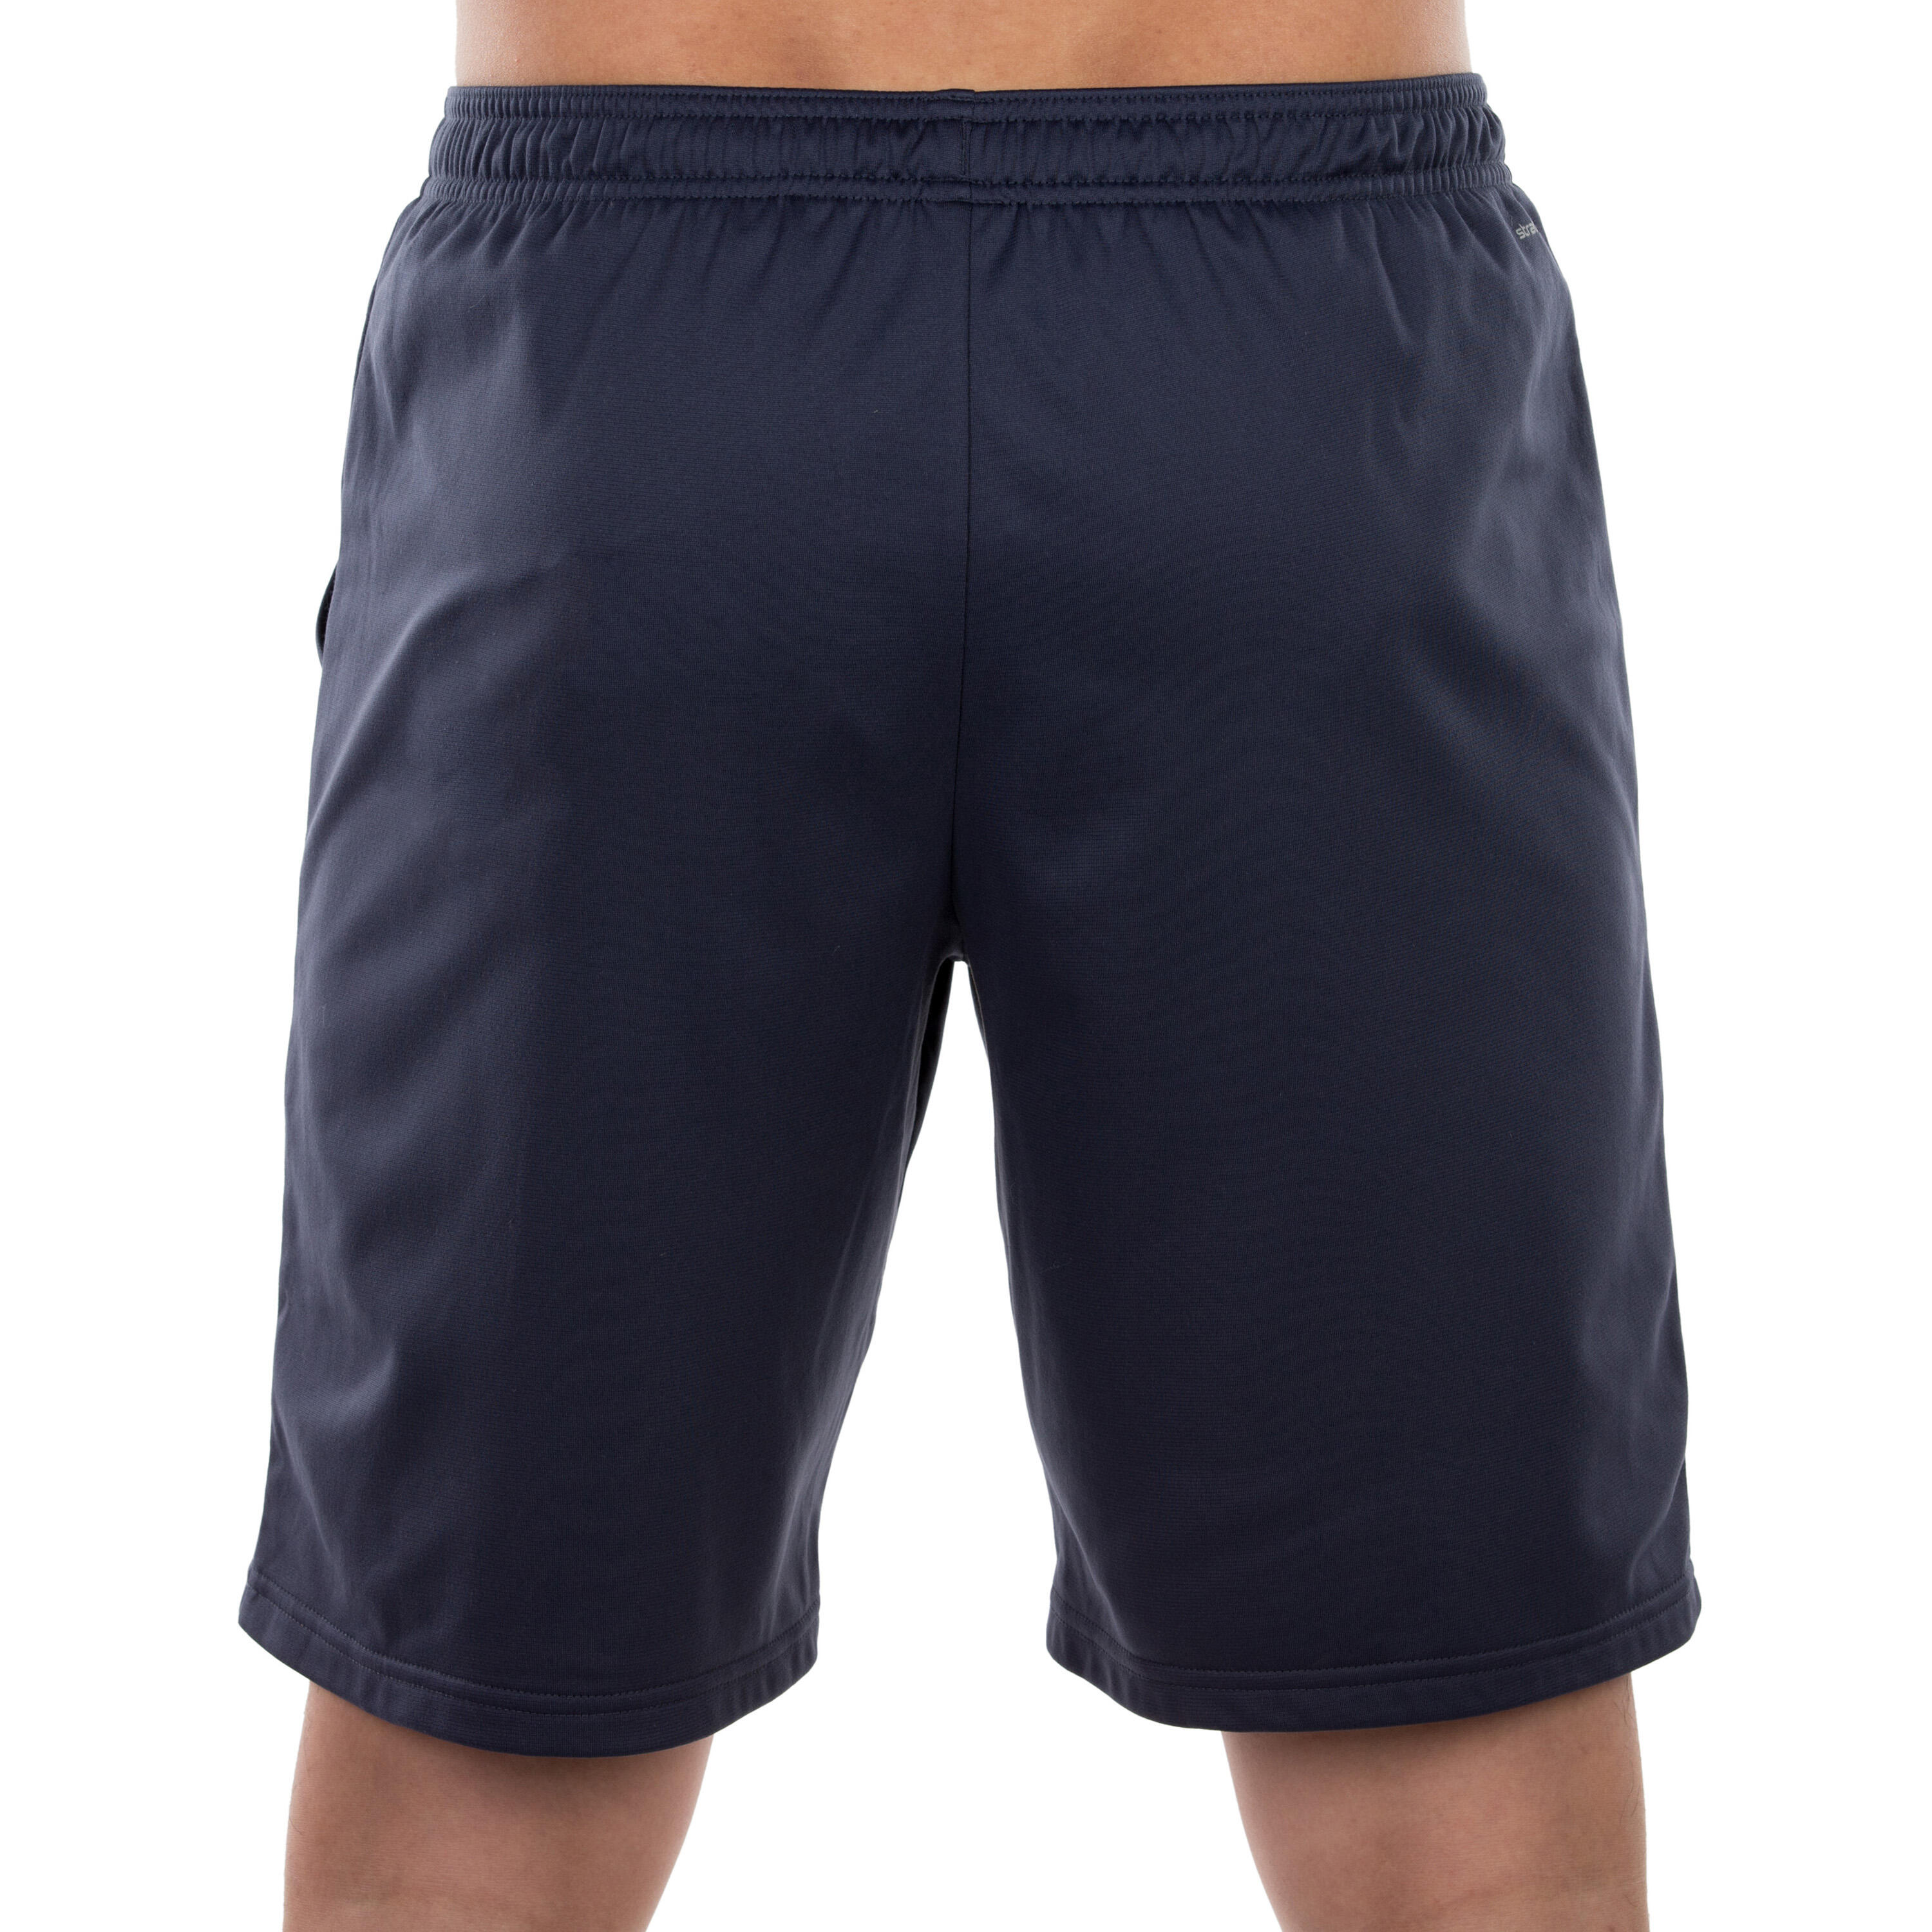 Essential Thermal Shorts - Navy Blue 3/8